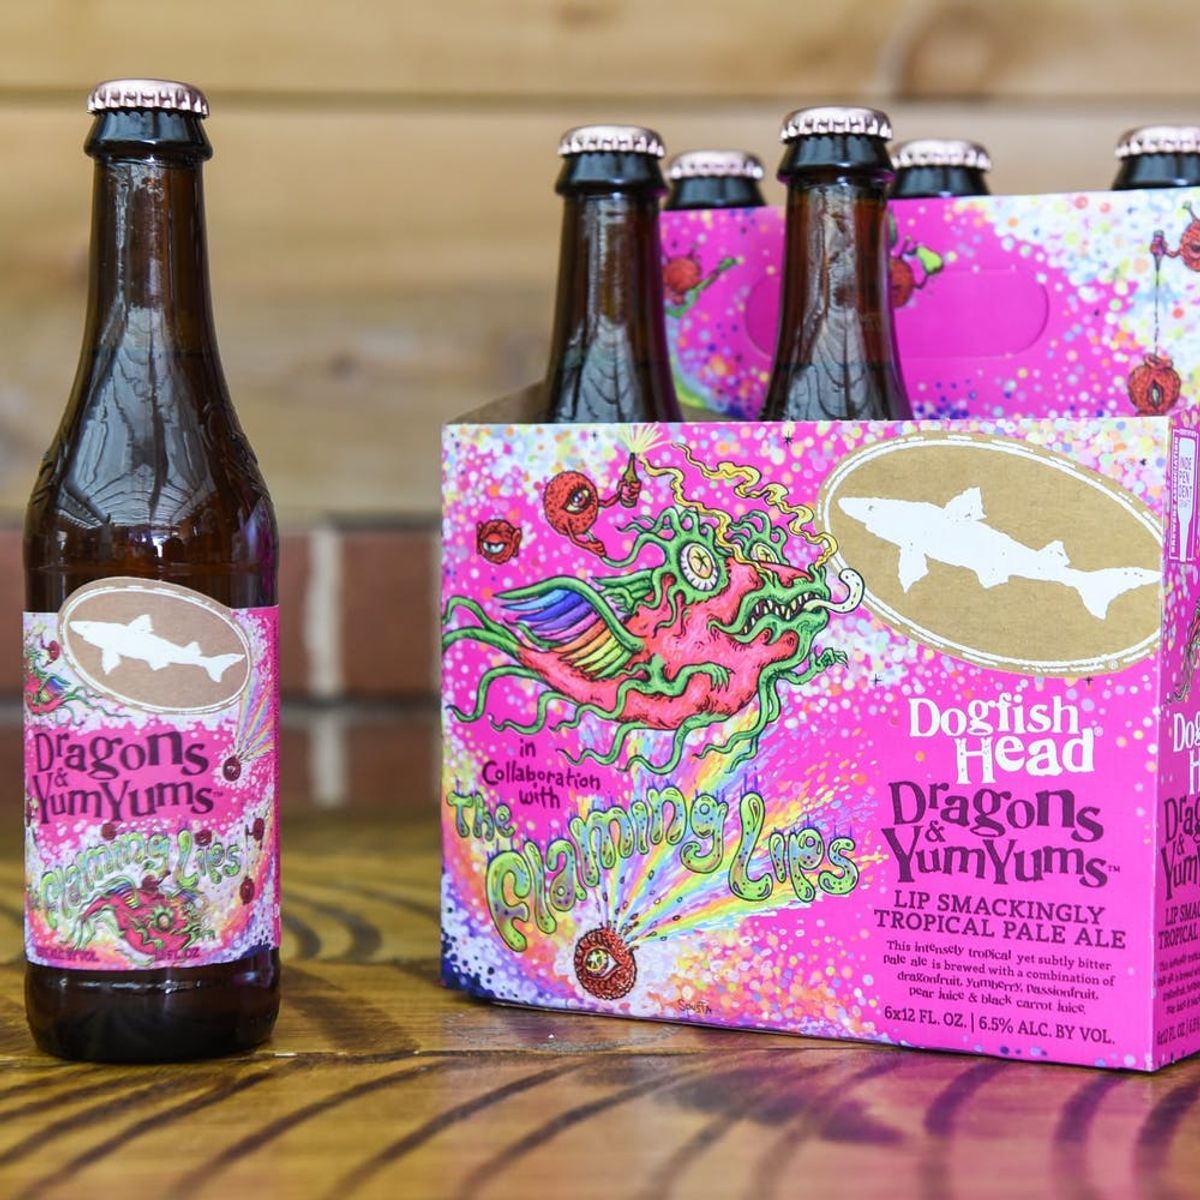 Are You Sitting Down? Because Flaming Lips Just Made a Pink Beer